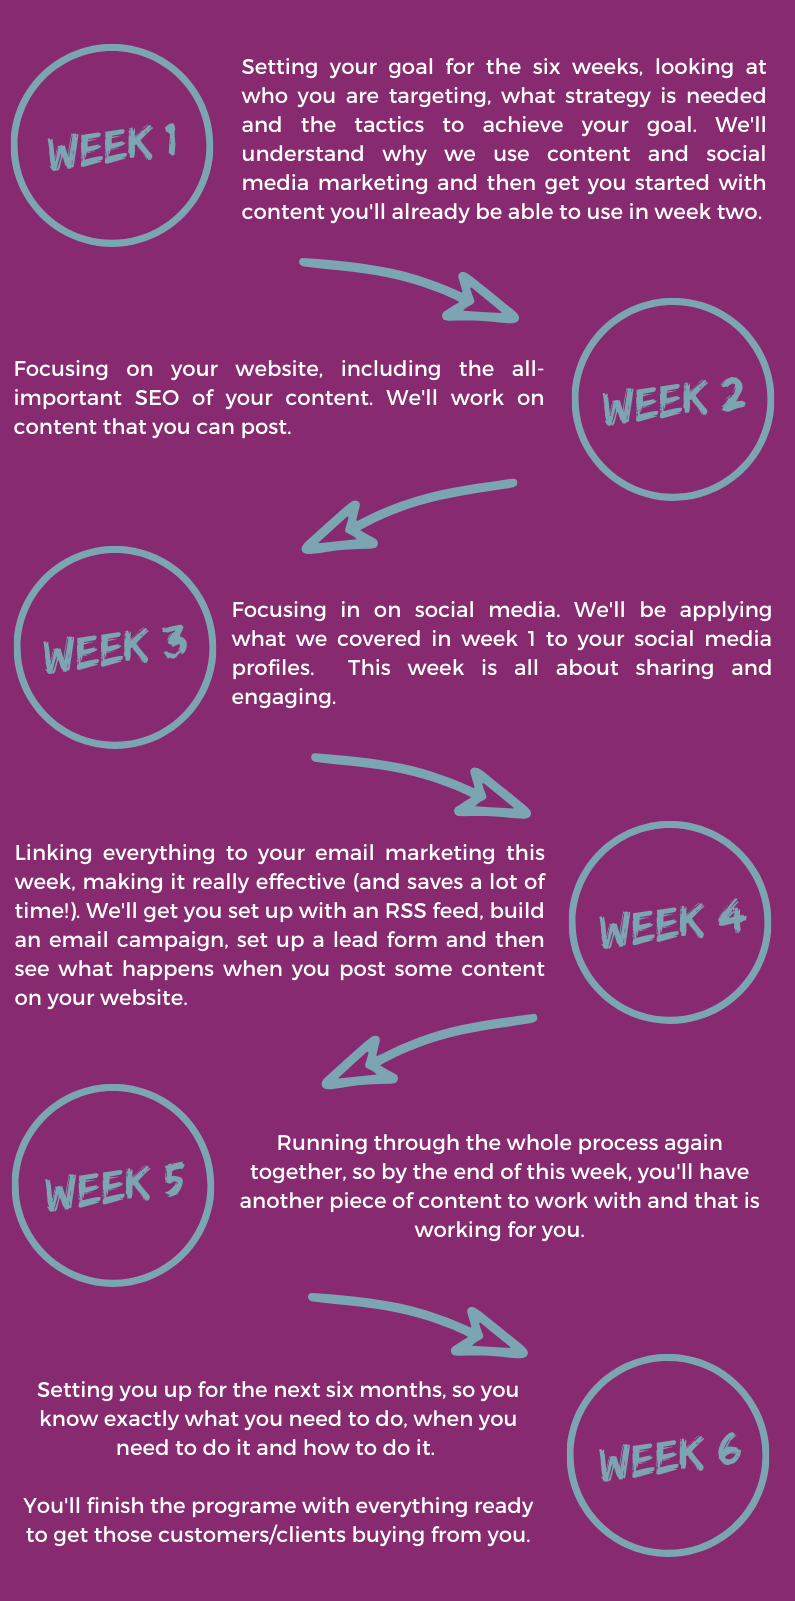 Week one: Set your goal for the six weeks, look at who you are targeting, what strategy is needed and the tactics to achieve your goal. We'll understand why we use content and social media marketing and then get you started with content you'll already be able to use in week two.  Week two: this week, we will focus on your website, including the all-important SEO of your content and we'll work on content that you can post. Week three: now the focus is on social media. We'll remind ourselves of the theory from week one and then start to apply it to your social media profiles.  This week is all about sharing and engaging. Week four: we'll link everything we have done with email marketing, which makes your marketing much more effective (and efficient!). We'll get you set up with an RSS feed, build an email campaign, set up a lead form and then look at the results to understand what happens when you post some content on your website. Week five: this week, we will run through the whole process again together, so by the end of the two-hours, you'll have another piece of content to work with and that is working for you. Week six: we'll work together to set you up for the next six months, so you know exactly what you need to do, when you need to do it and how to do it. You'll finish this session with everything ready to market and get those clients contacting you.